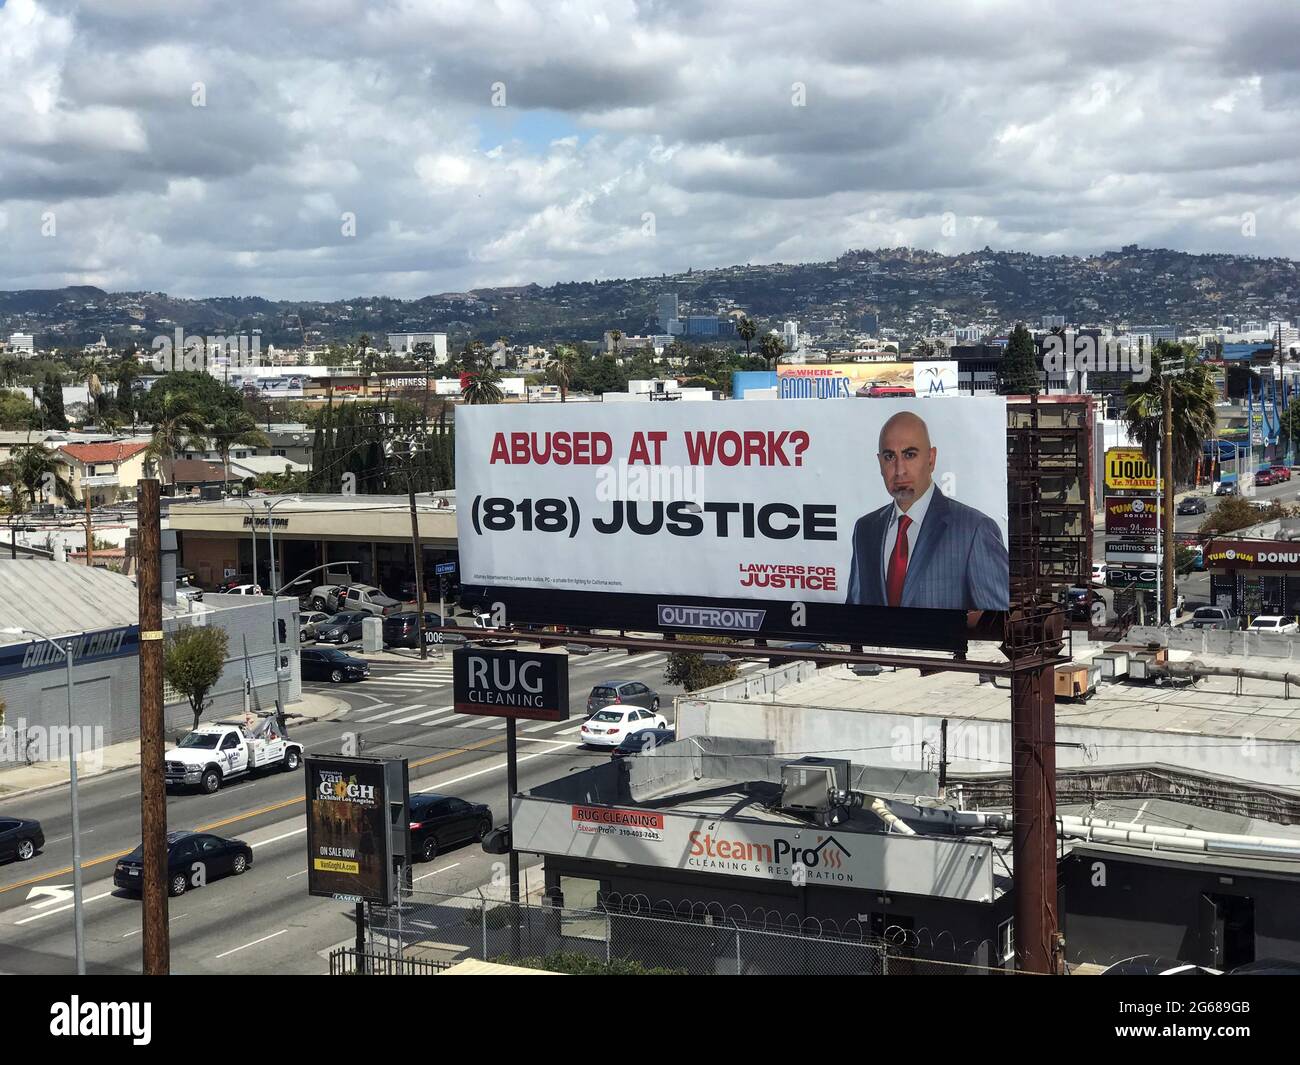 Billboard in Los Angeles urban landscape advertising legal services for abuse at work. Stock Photo